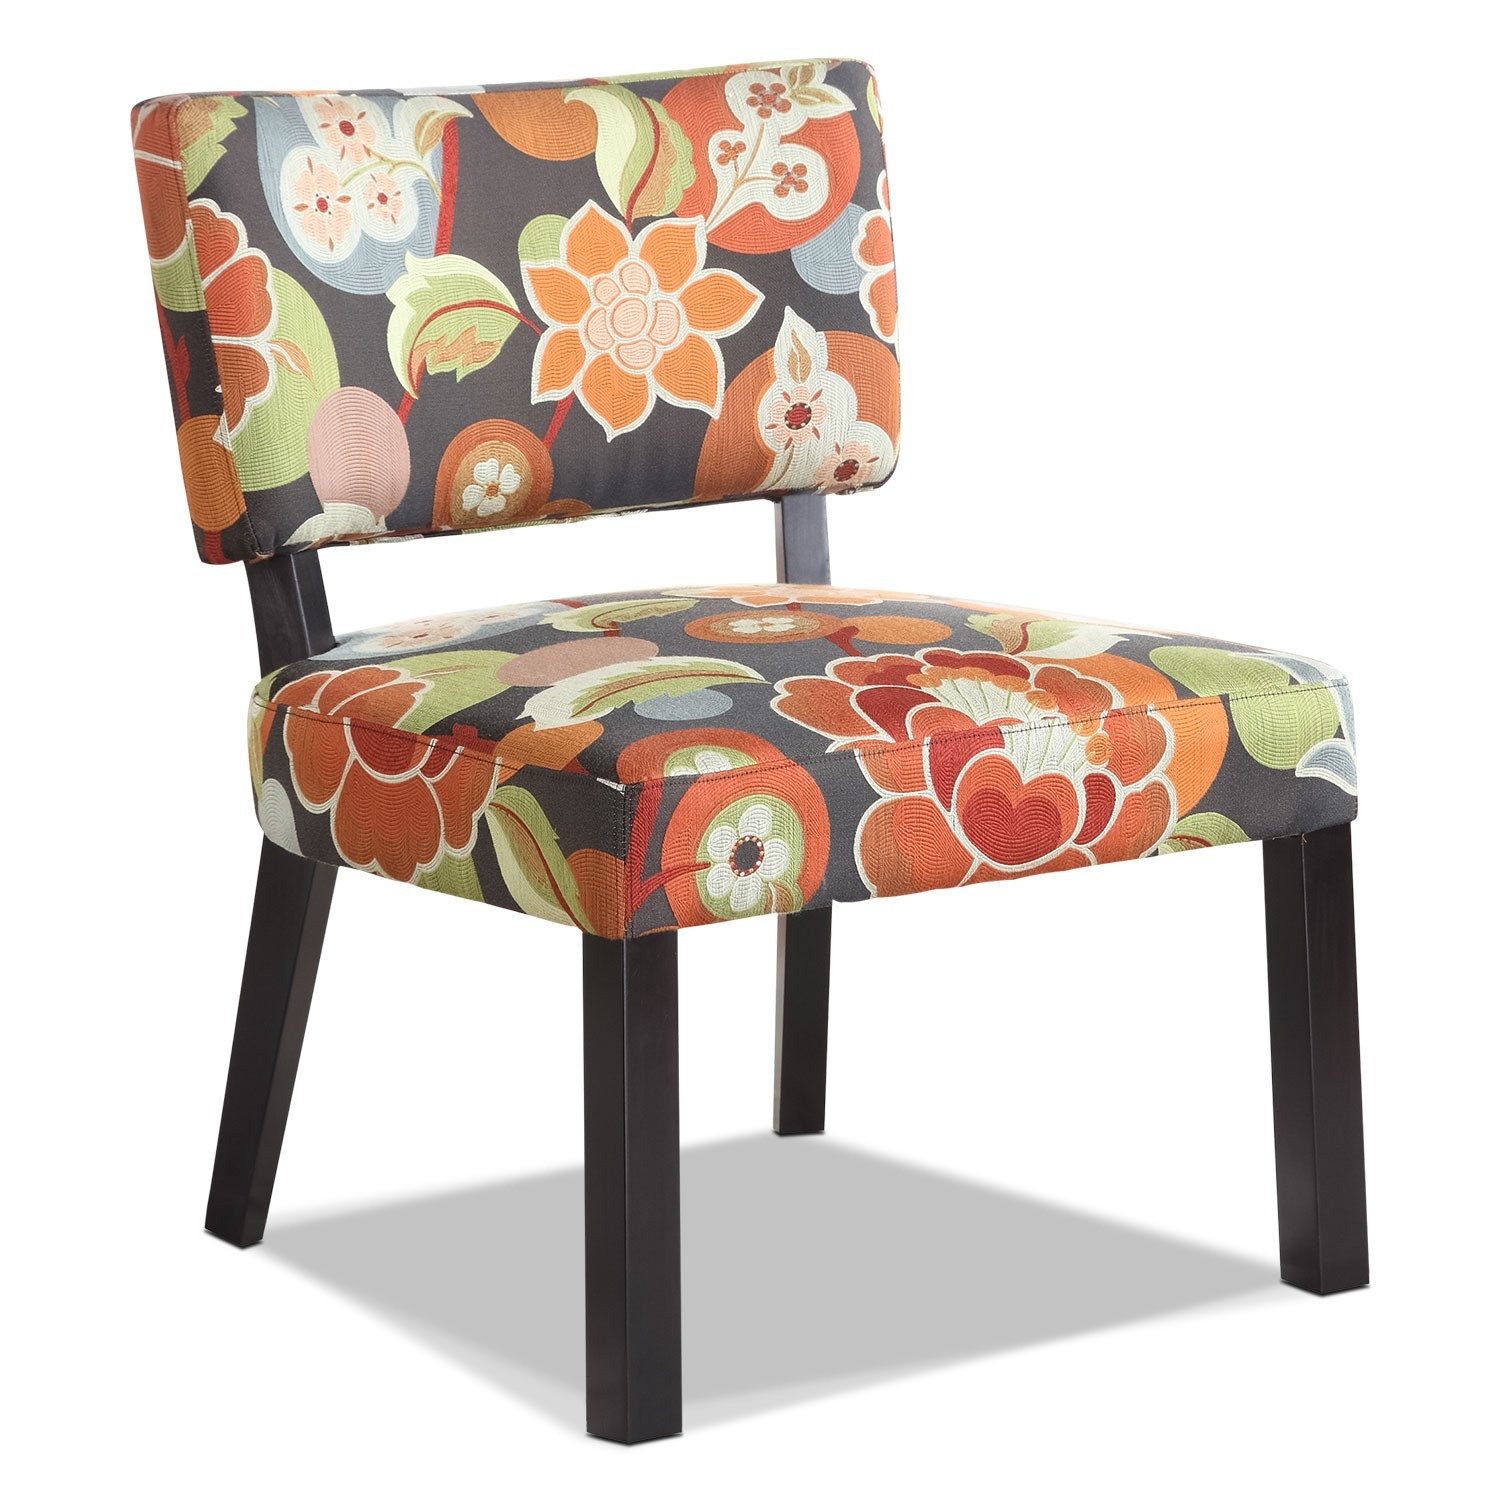 Floral Living Room Chairs
 Florence Accent Chair Floral